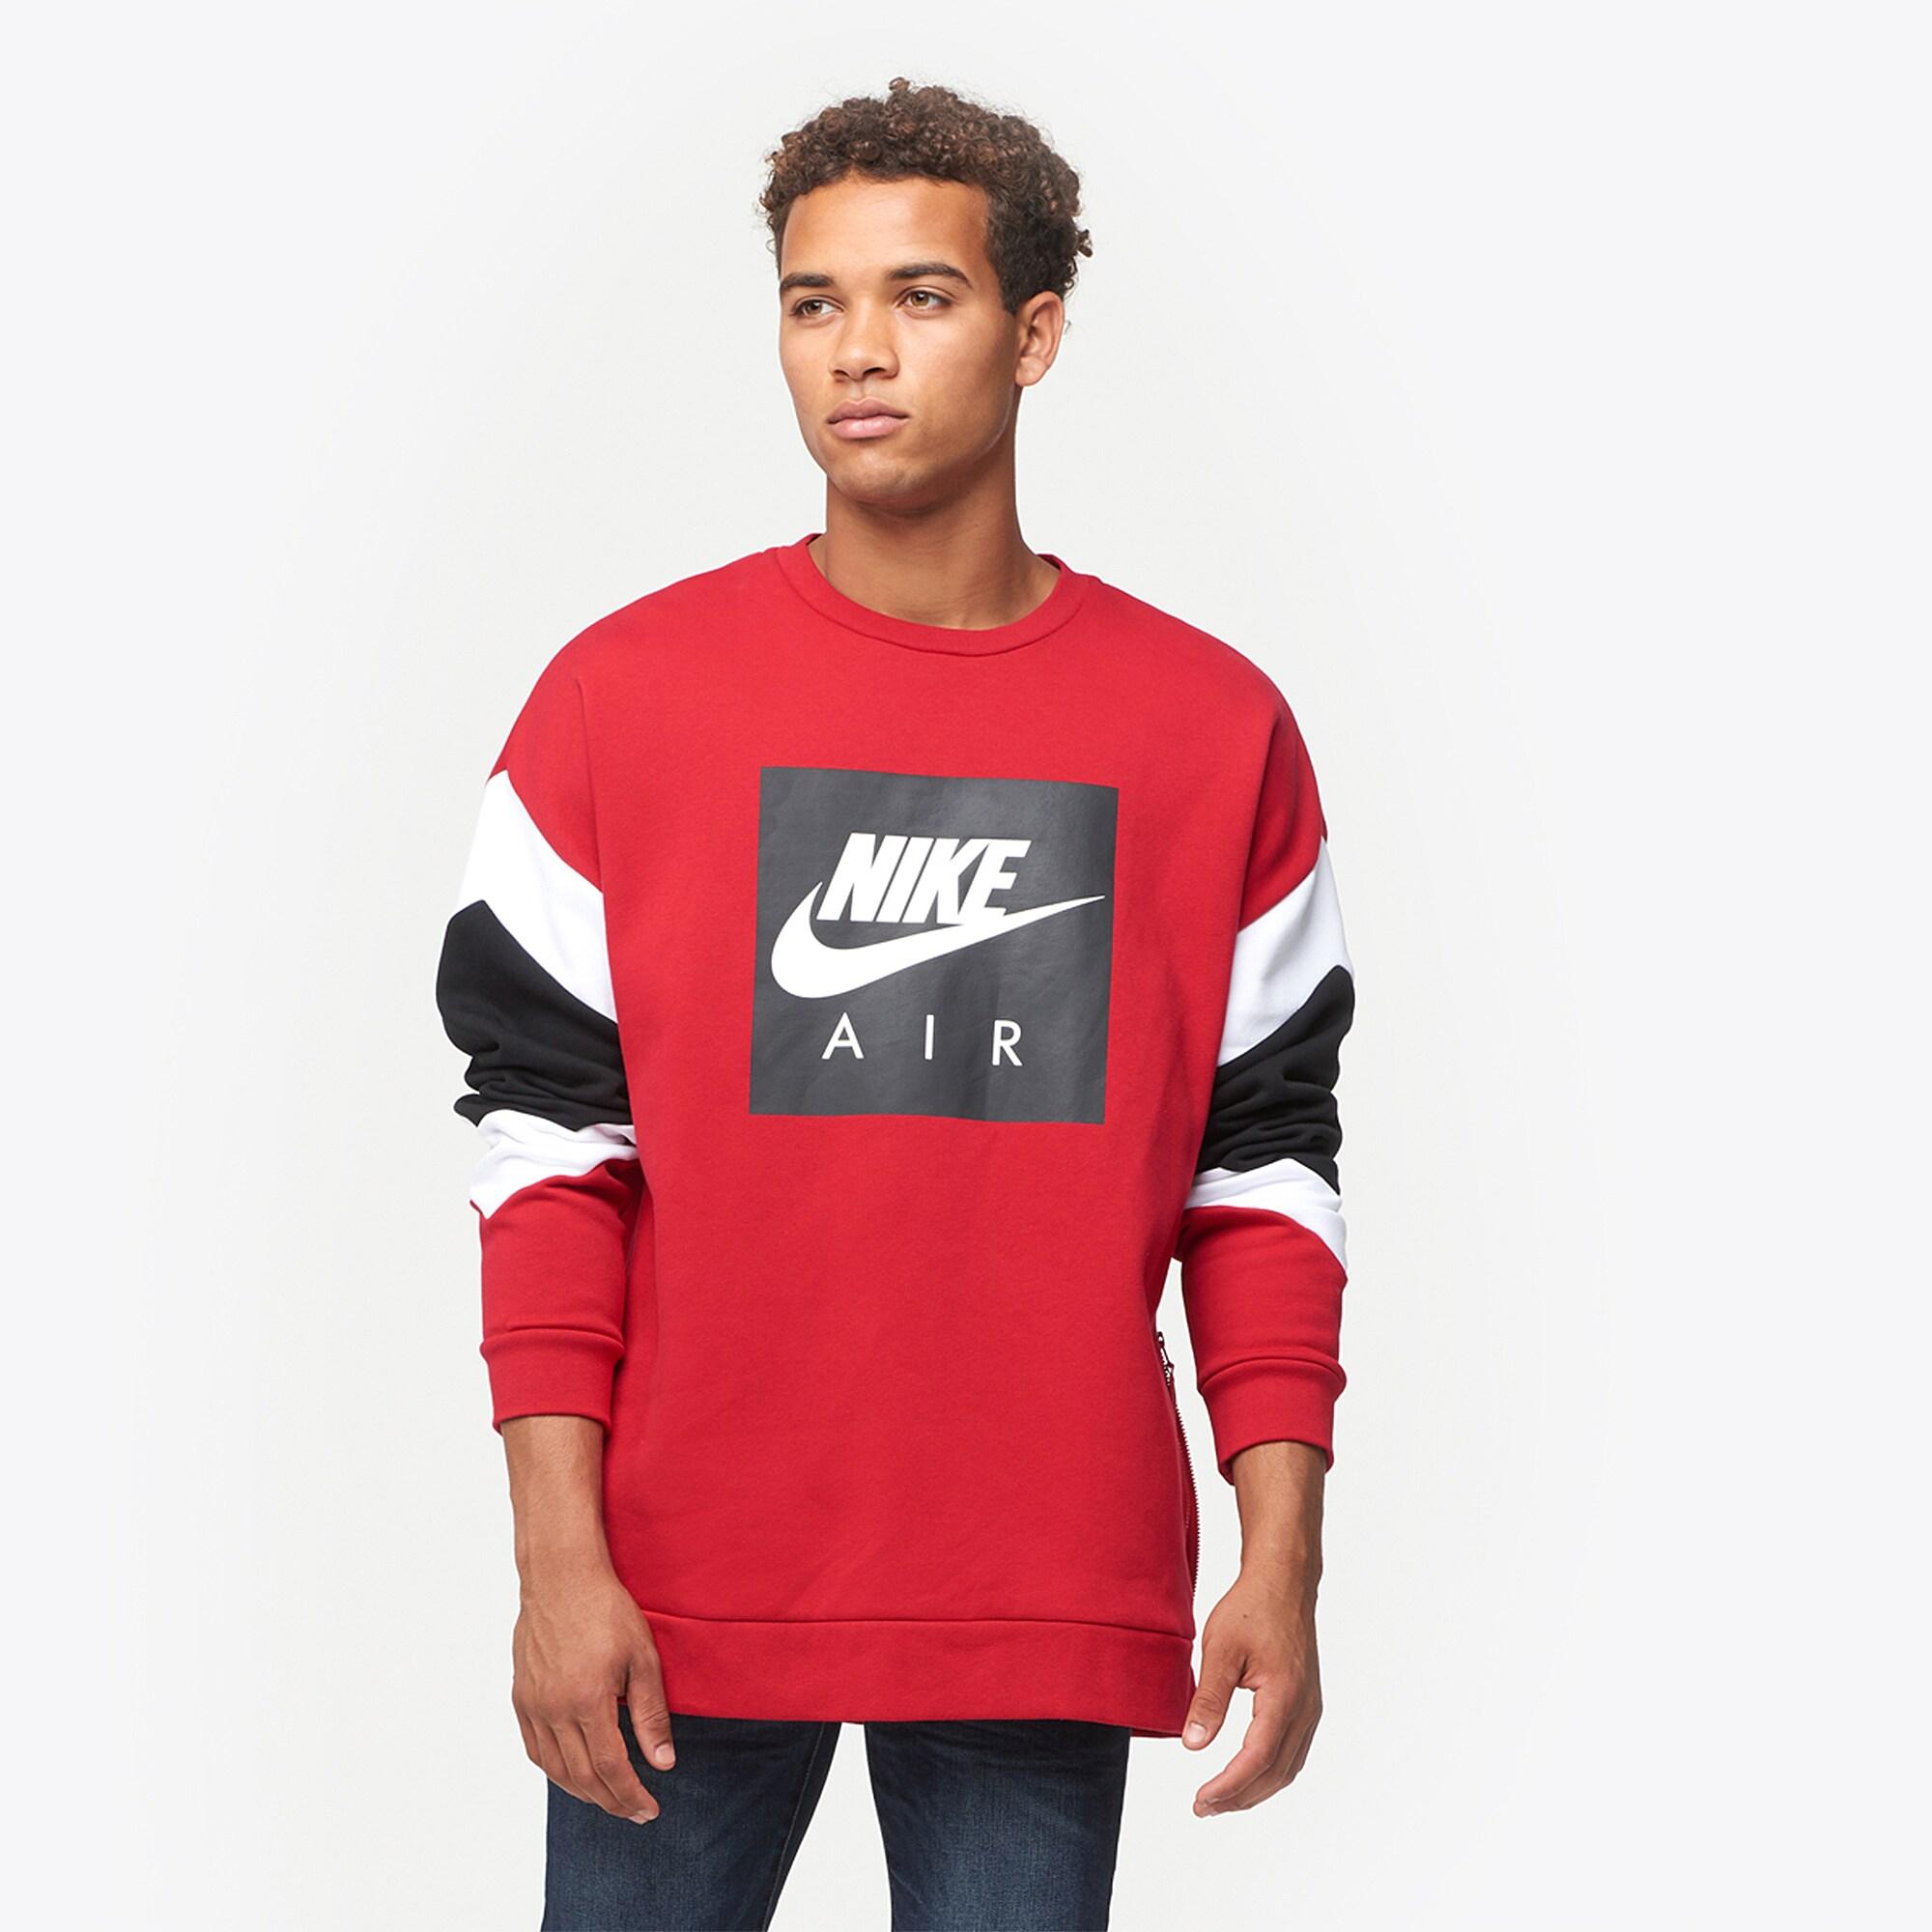 Nike Cotton Air Fleece Crew in Red for Men - Lyst